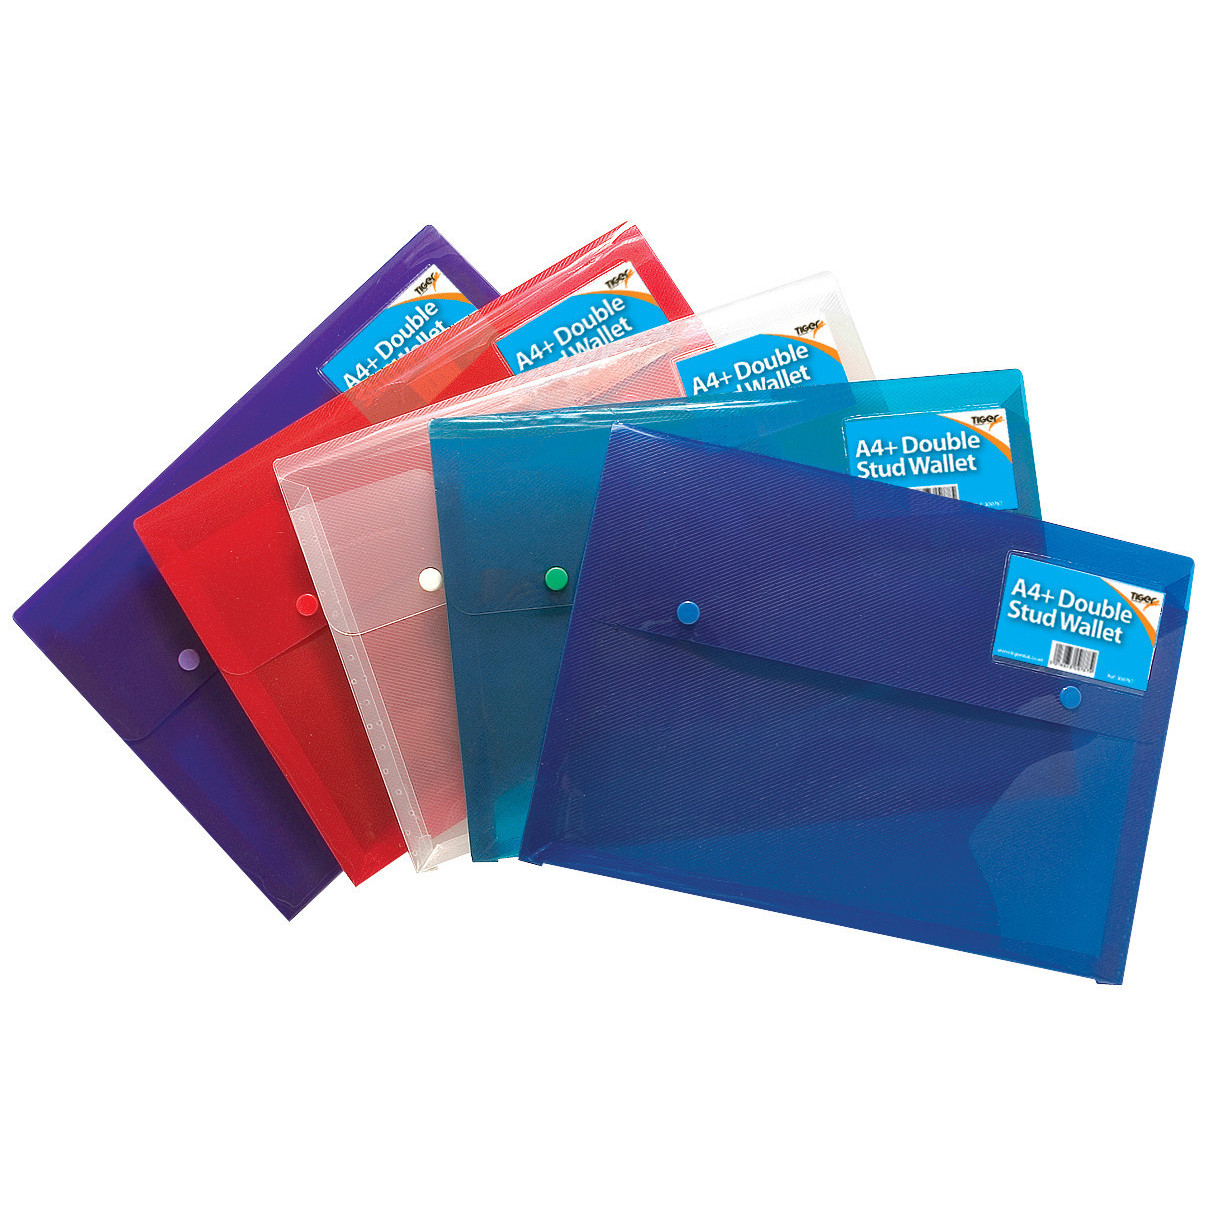 A4+ Double Stud Wallet, 5 Assorted Colours, 330 micron